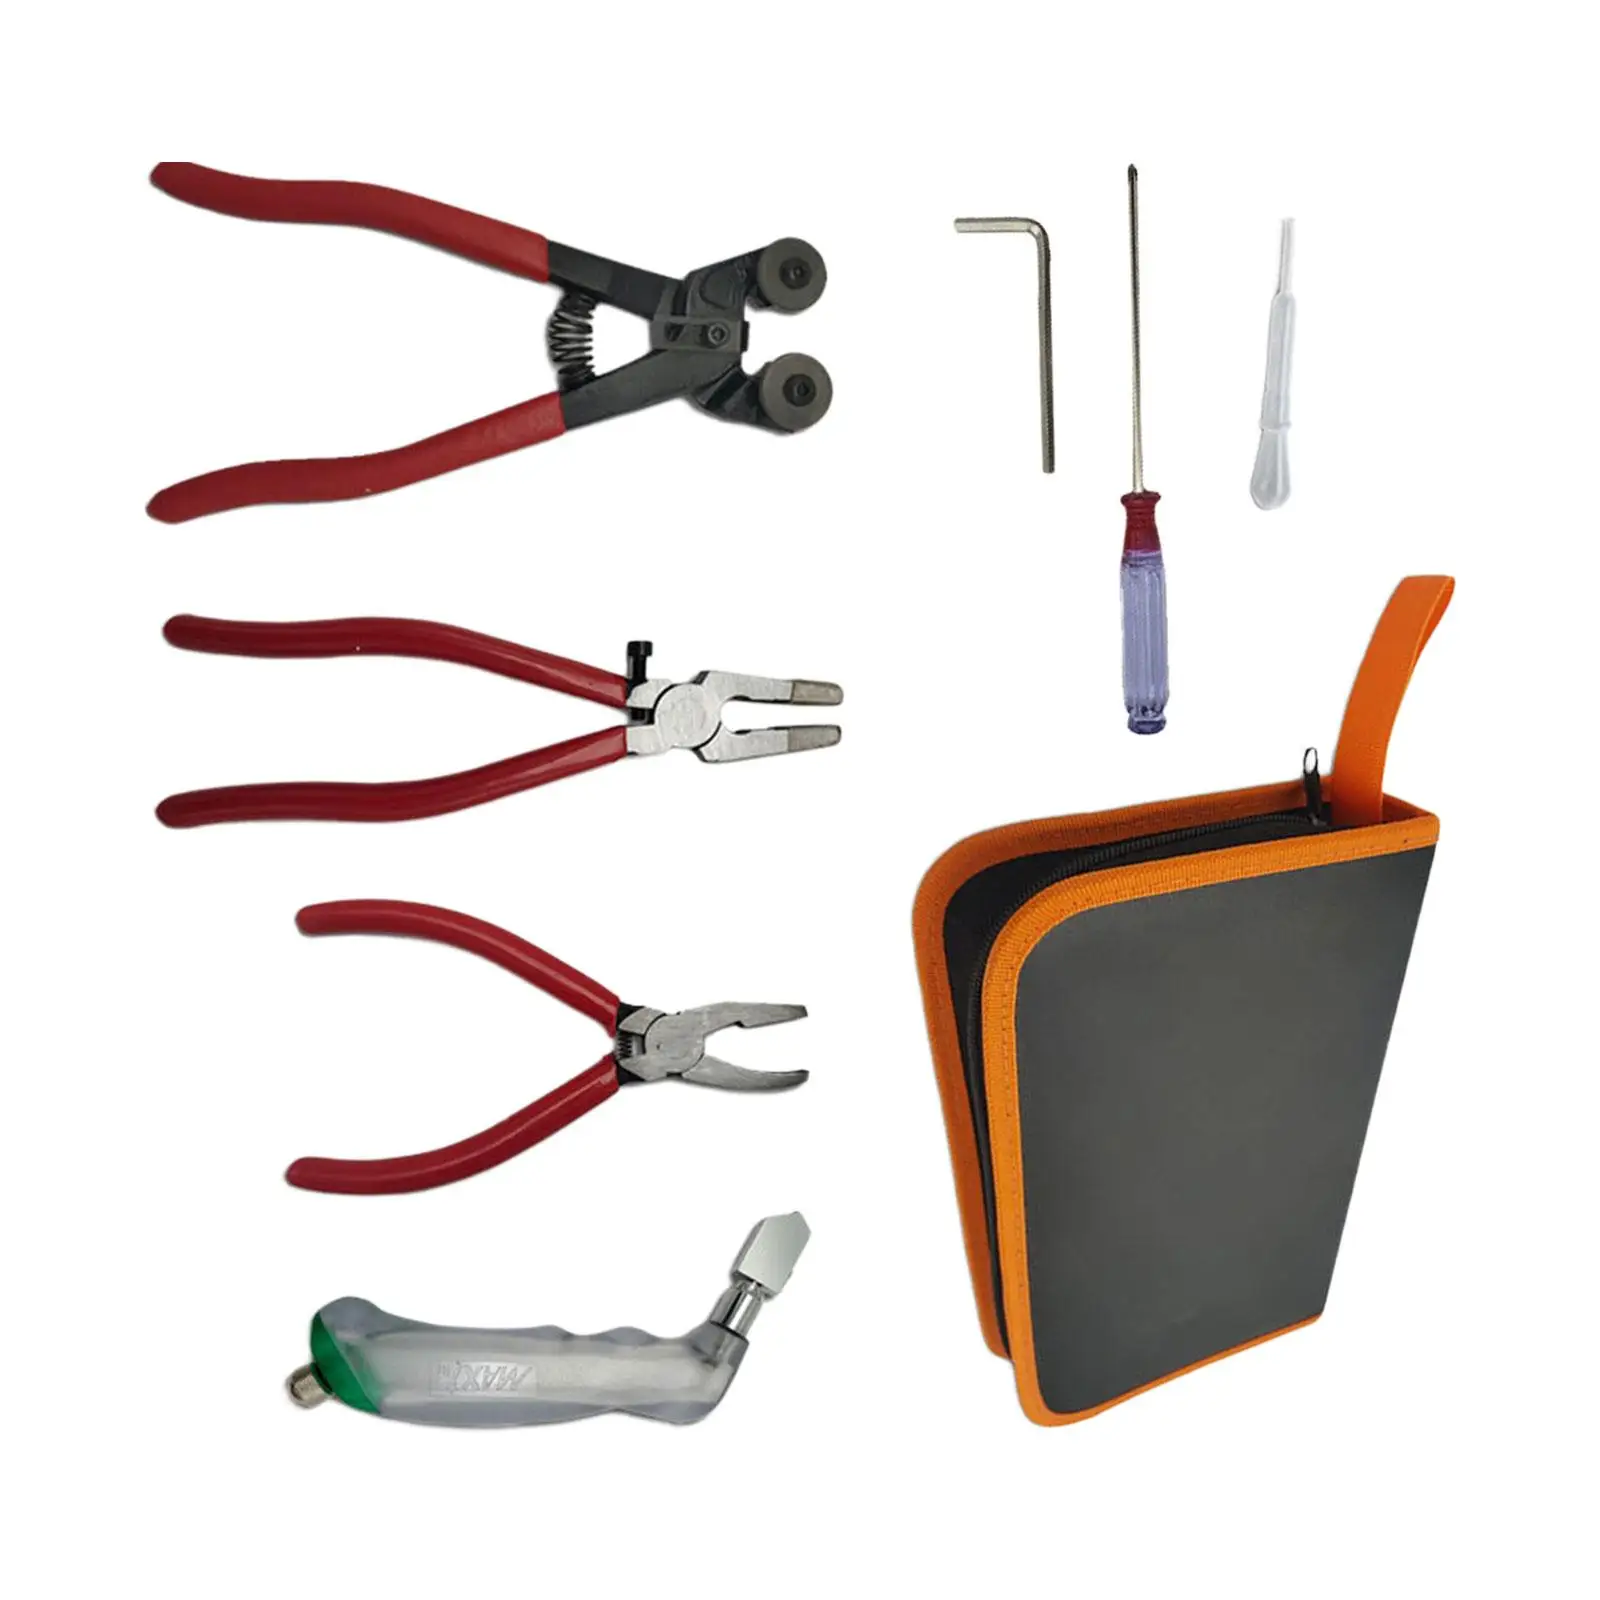 Glass Cutting Tool Set Glass Running Pliers Breaking Pliers Oil Dropper Storage Bag for Mosaic Tiles Mirrors Stained Glass